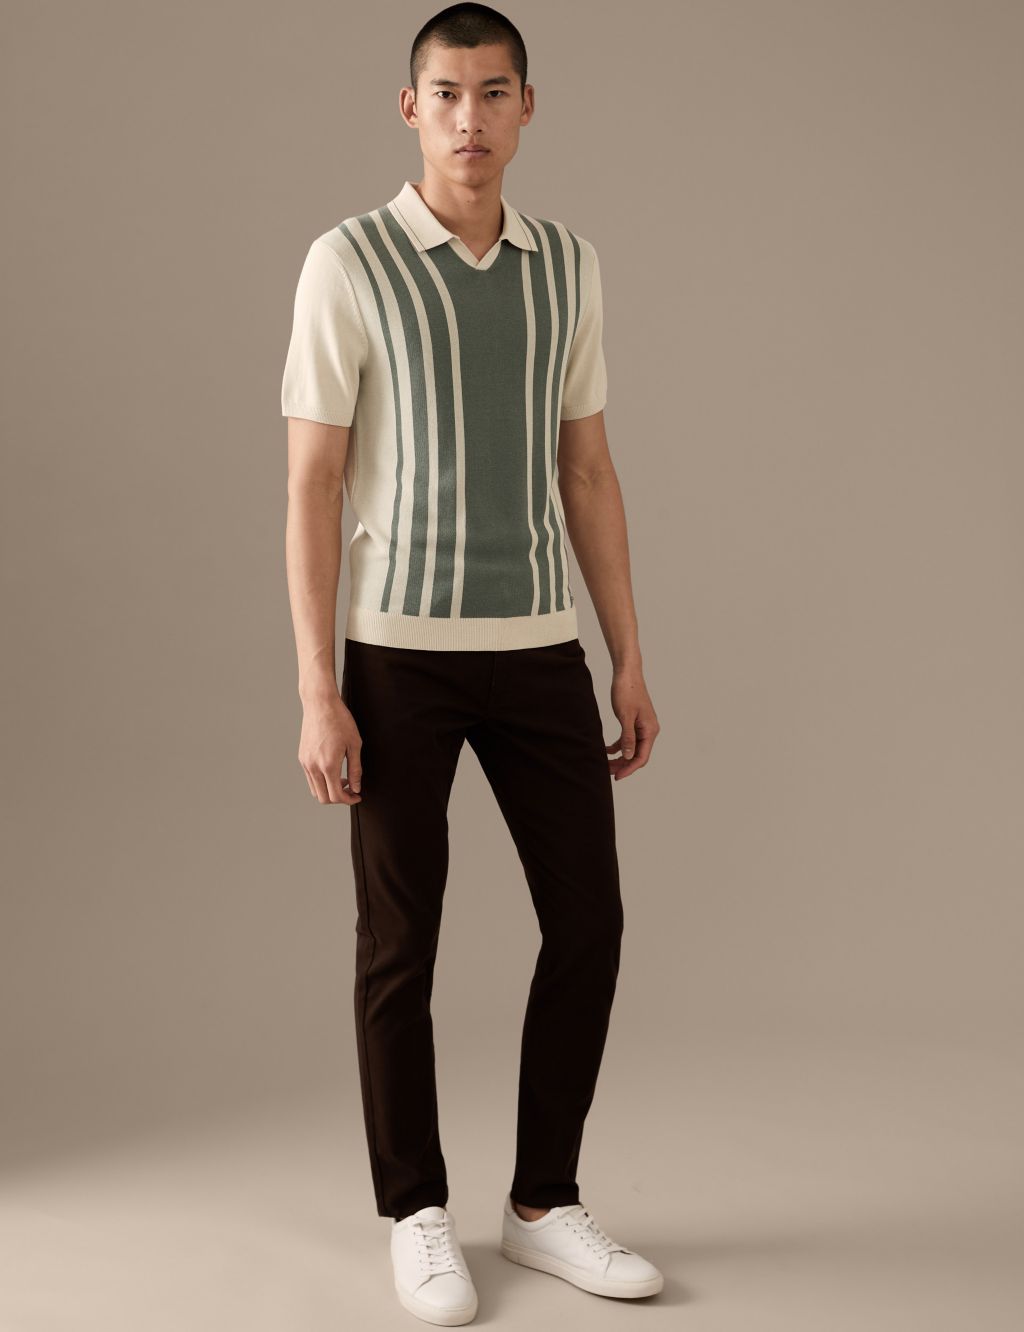 Cotton Blend Striped Knitted Polo Shirt image 3